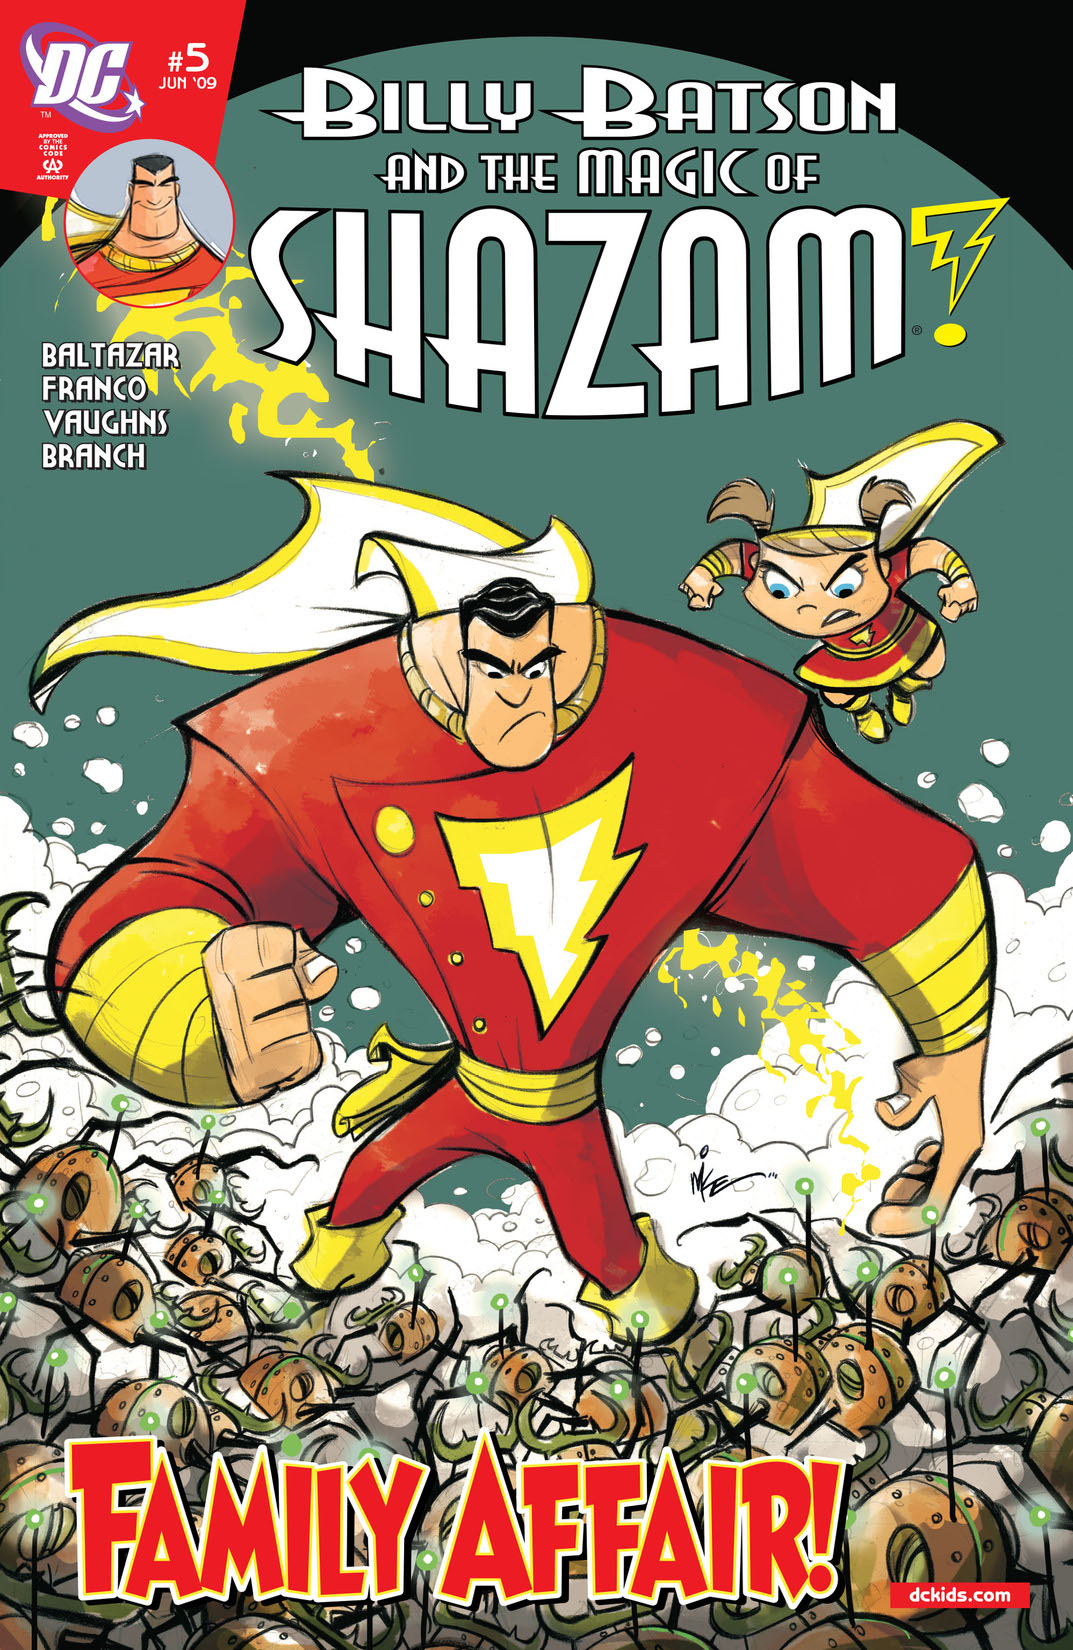 Billy Batson & the Magic of Shazam! #5 preview images